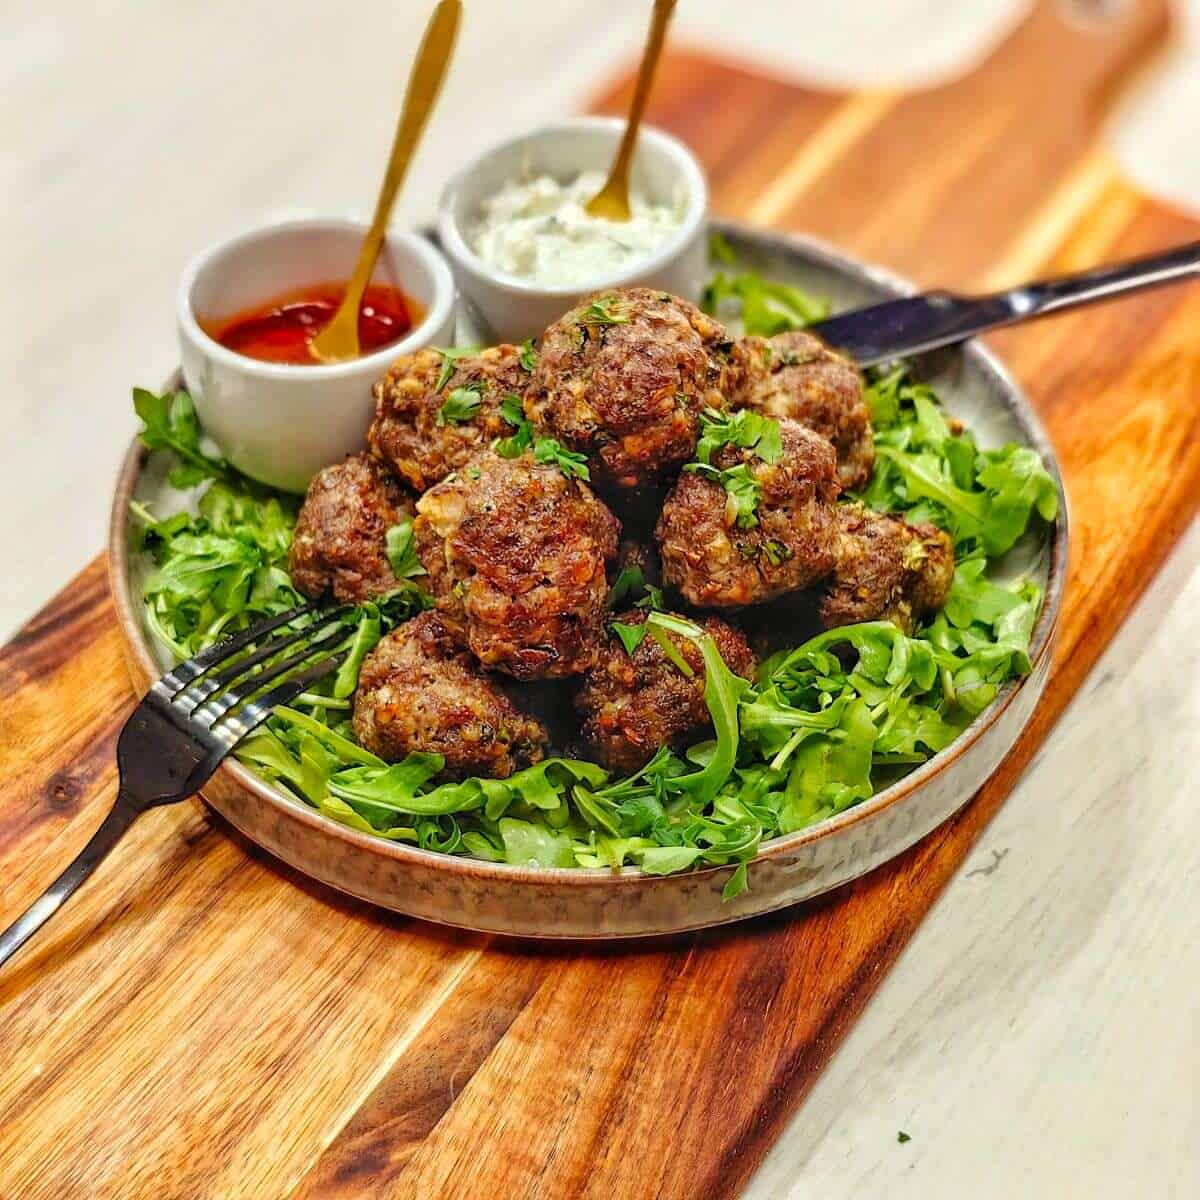 air-fried meatballs with greens and sauces